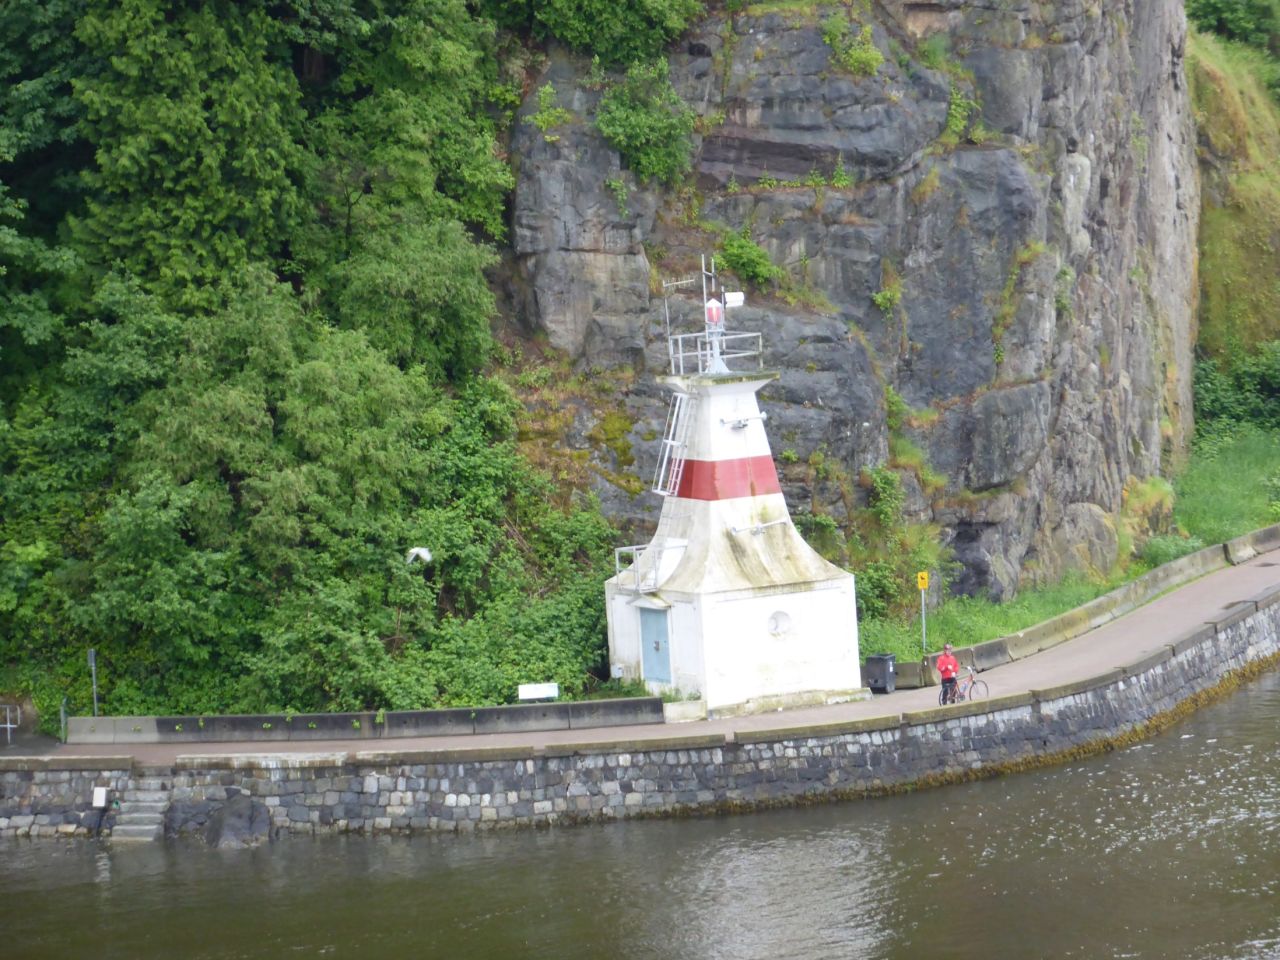 In the early 1900s, <a href="http://ireport.cnn.com/docs/DOC-1156756">Prospect Point's lighthouse</a> was one of the only lights to guide mariners through the thick fog and narrow channel into Vancouver's inner harbor. 